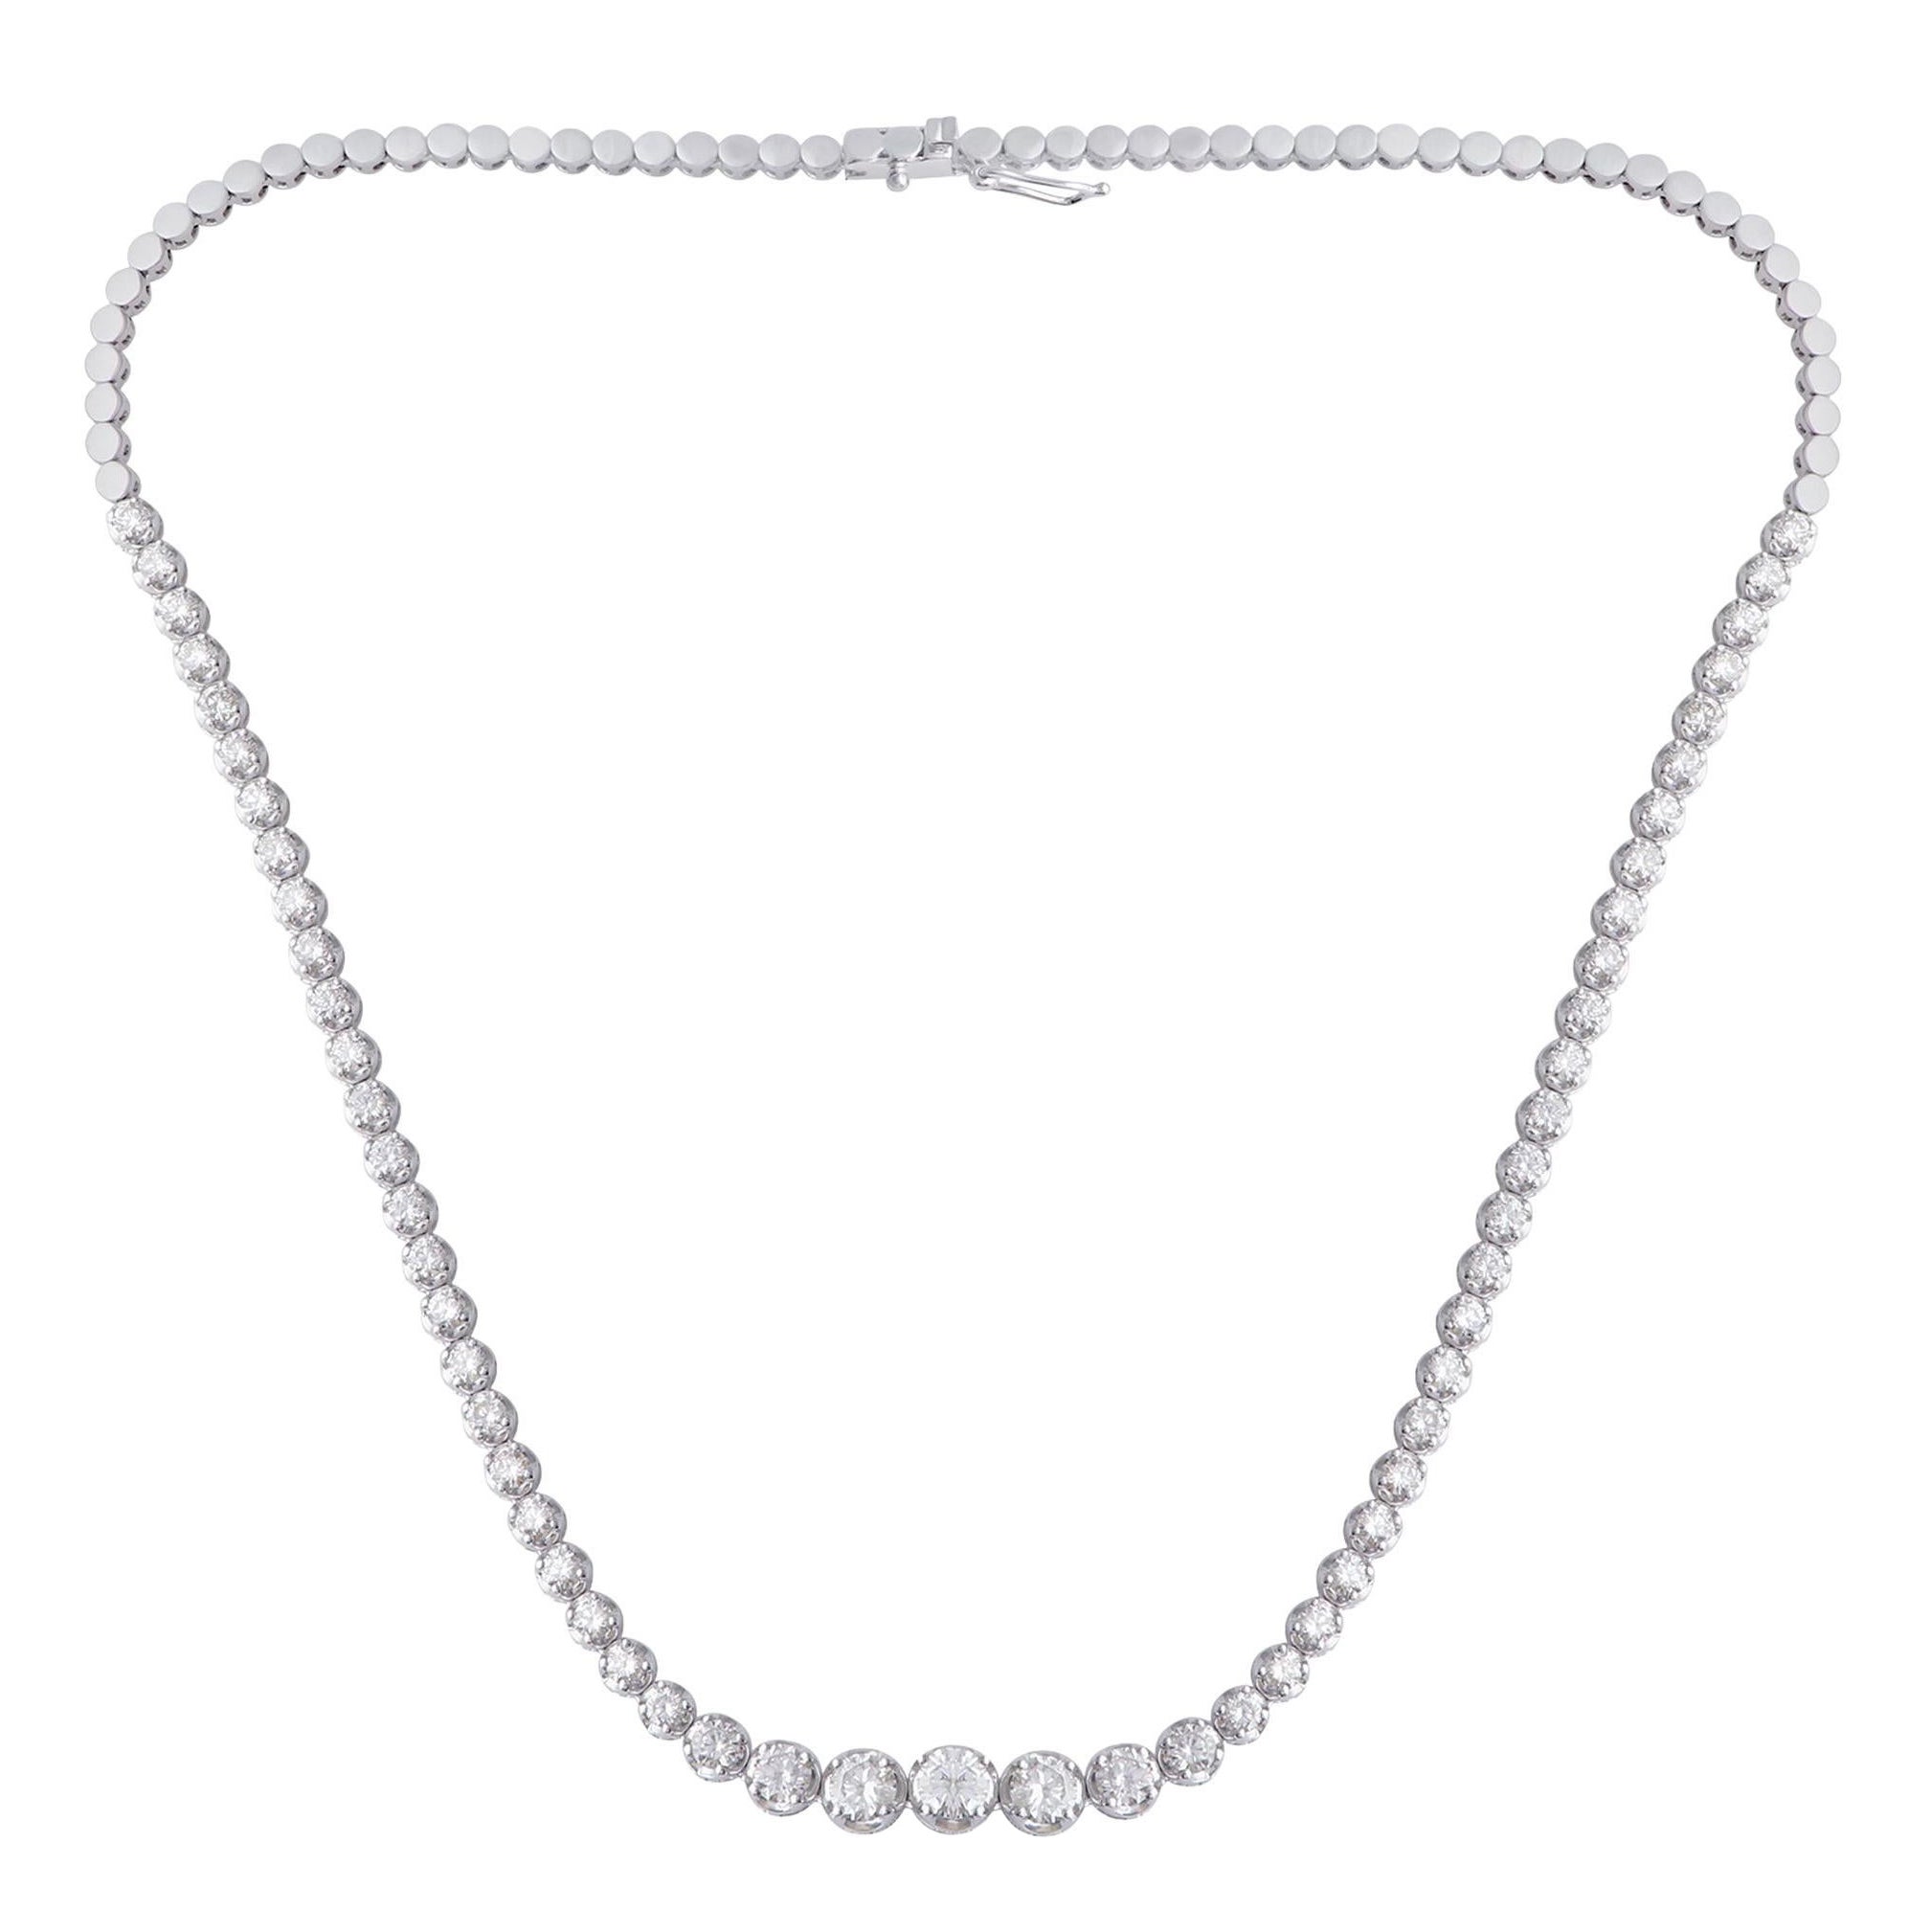 6.1 Carat SI Clarity HI Color Diamond Chain Necklace 14 Karat White Gold Jewelry For Sale